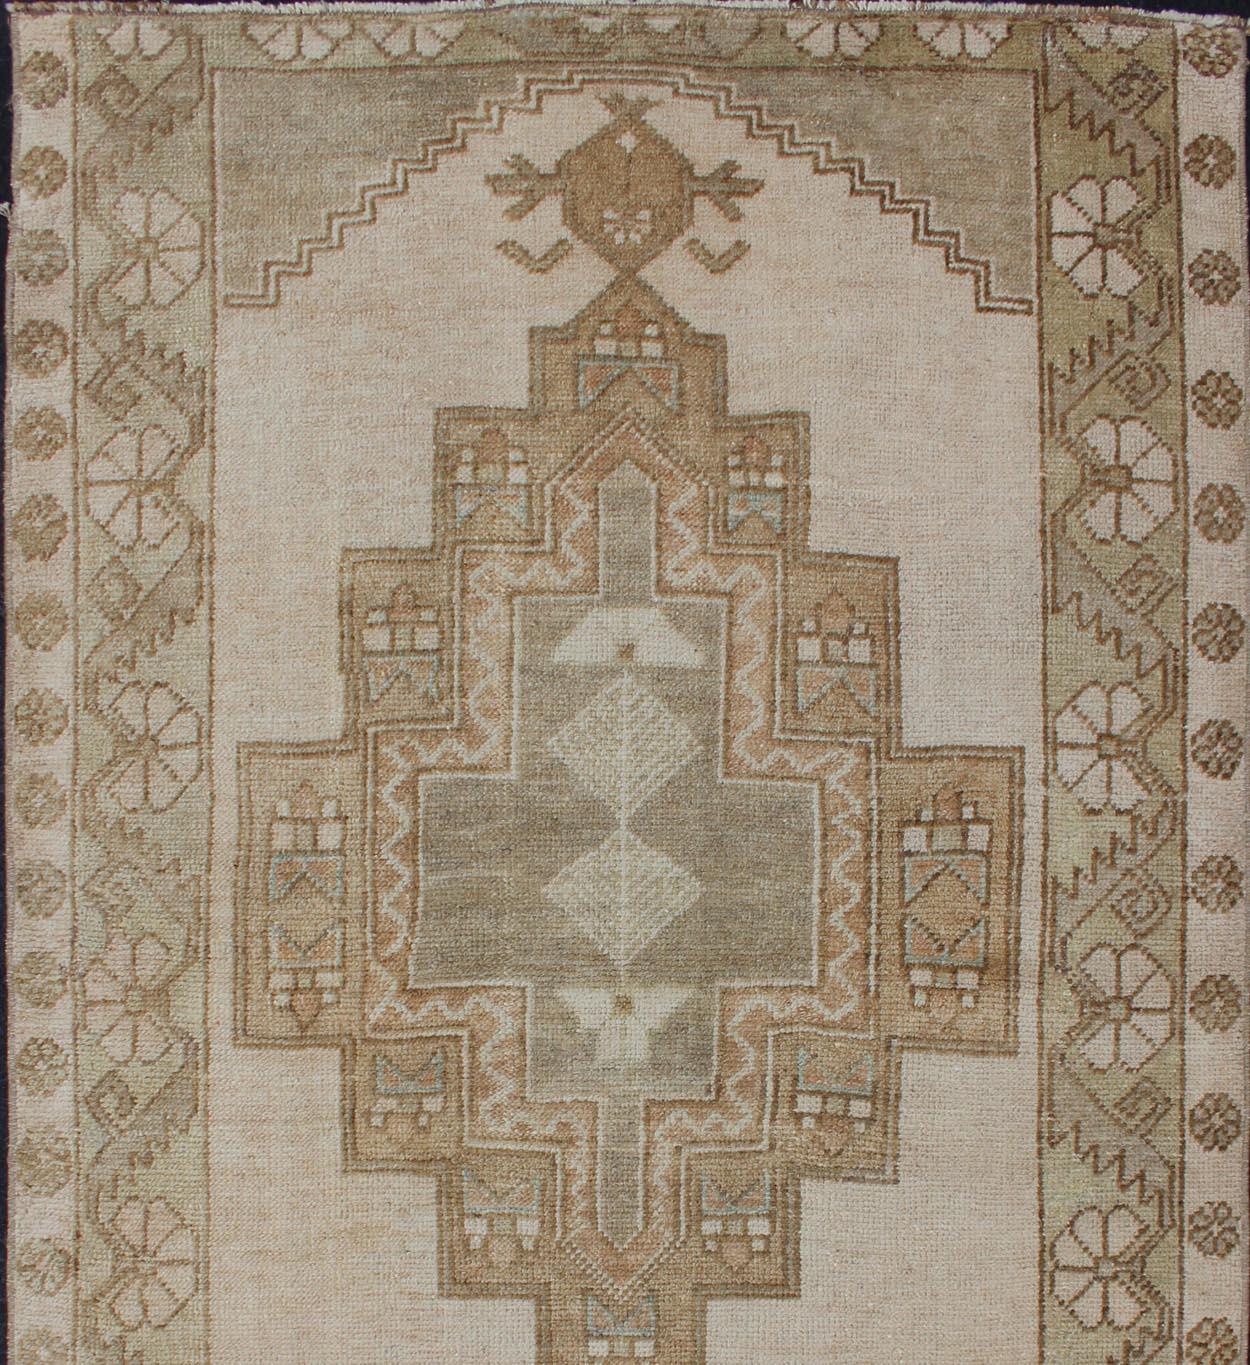 Vintage oushak from Turkey with Medallion design in various tones of green, tan, sand, taupe and light green rug EN-176671, country of origin / type: Turkey / oushak, circa 1940. 
This beautiful vintage Oushak rug from 1940s Turkey features a